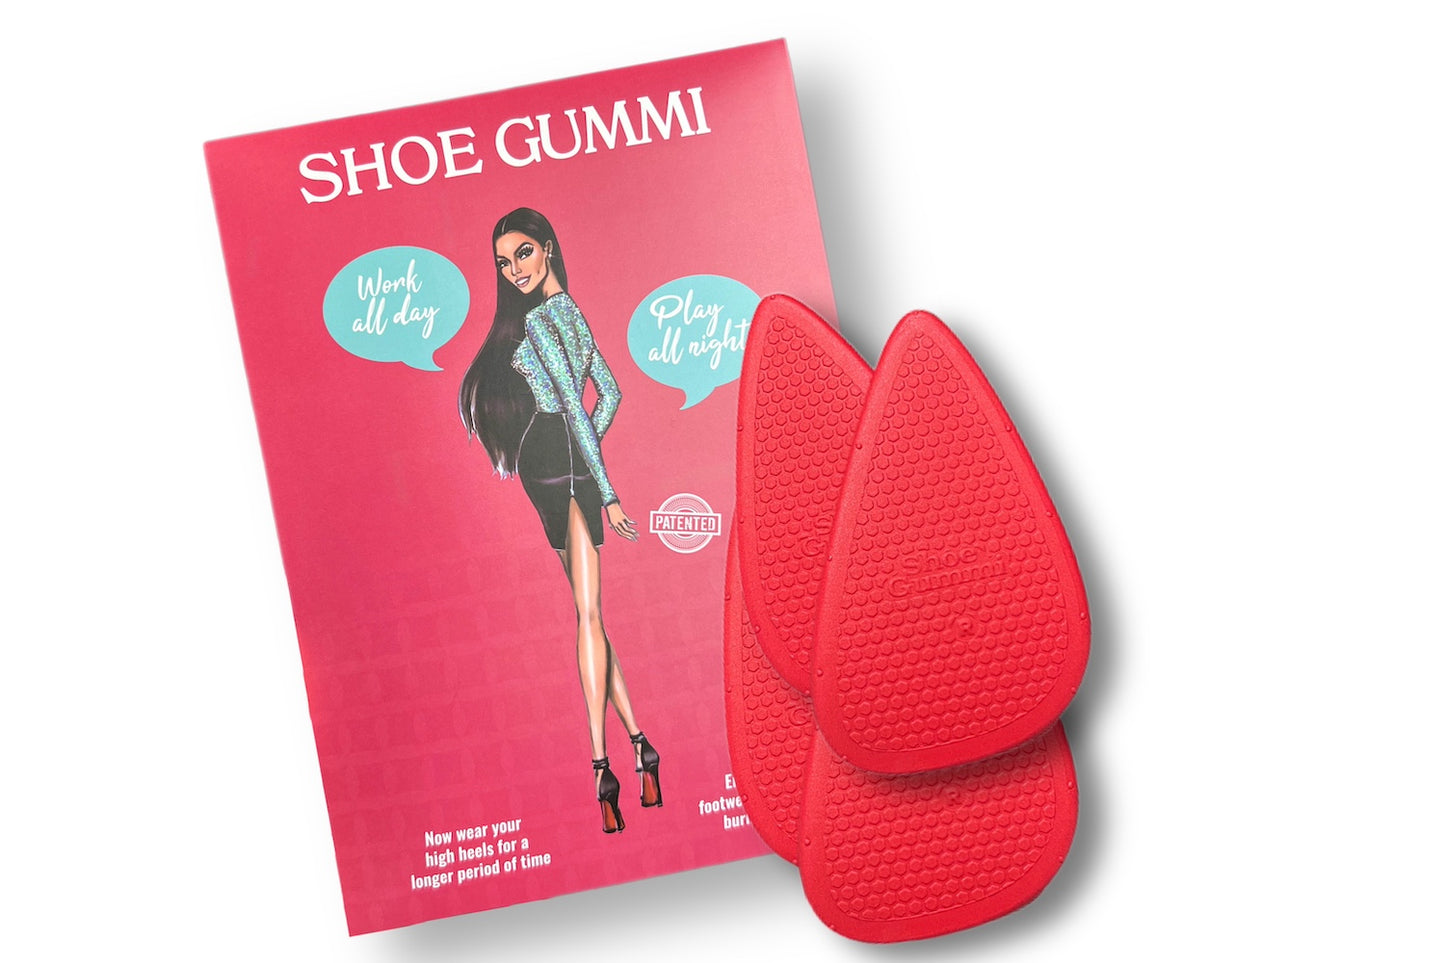 SHOE GUMMI (POINTED RED)